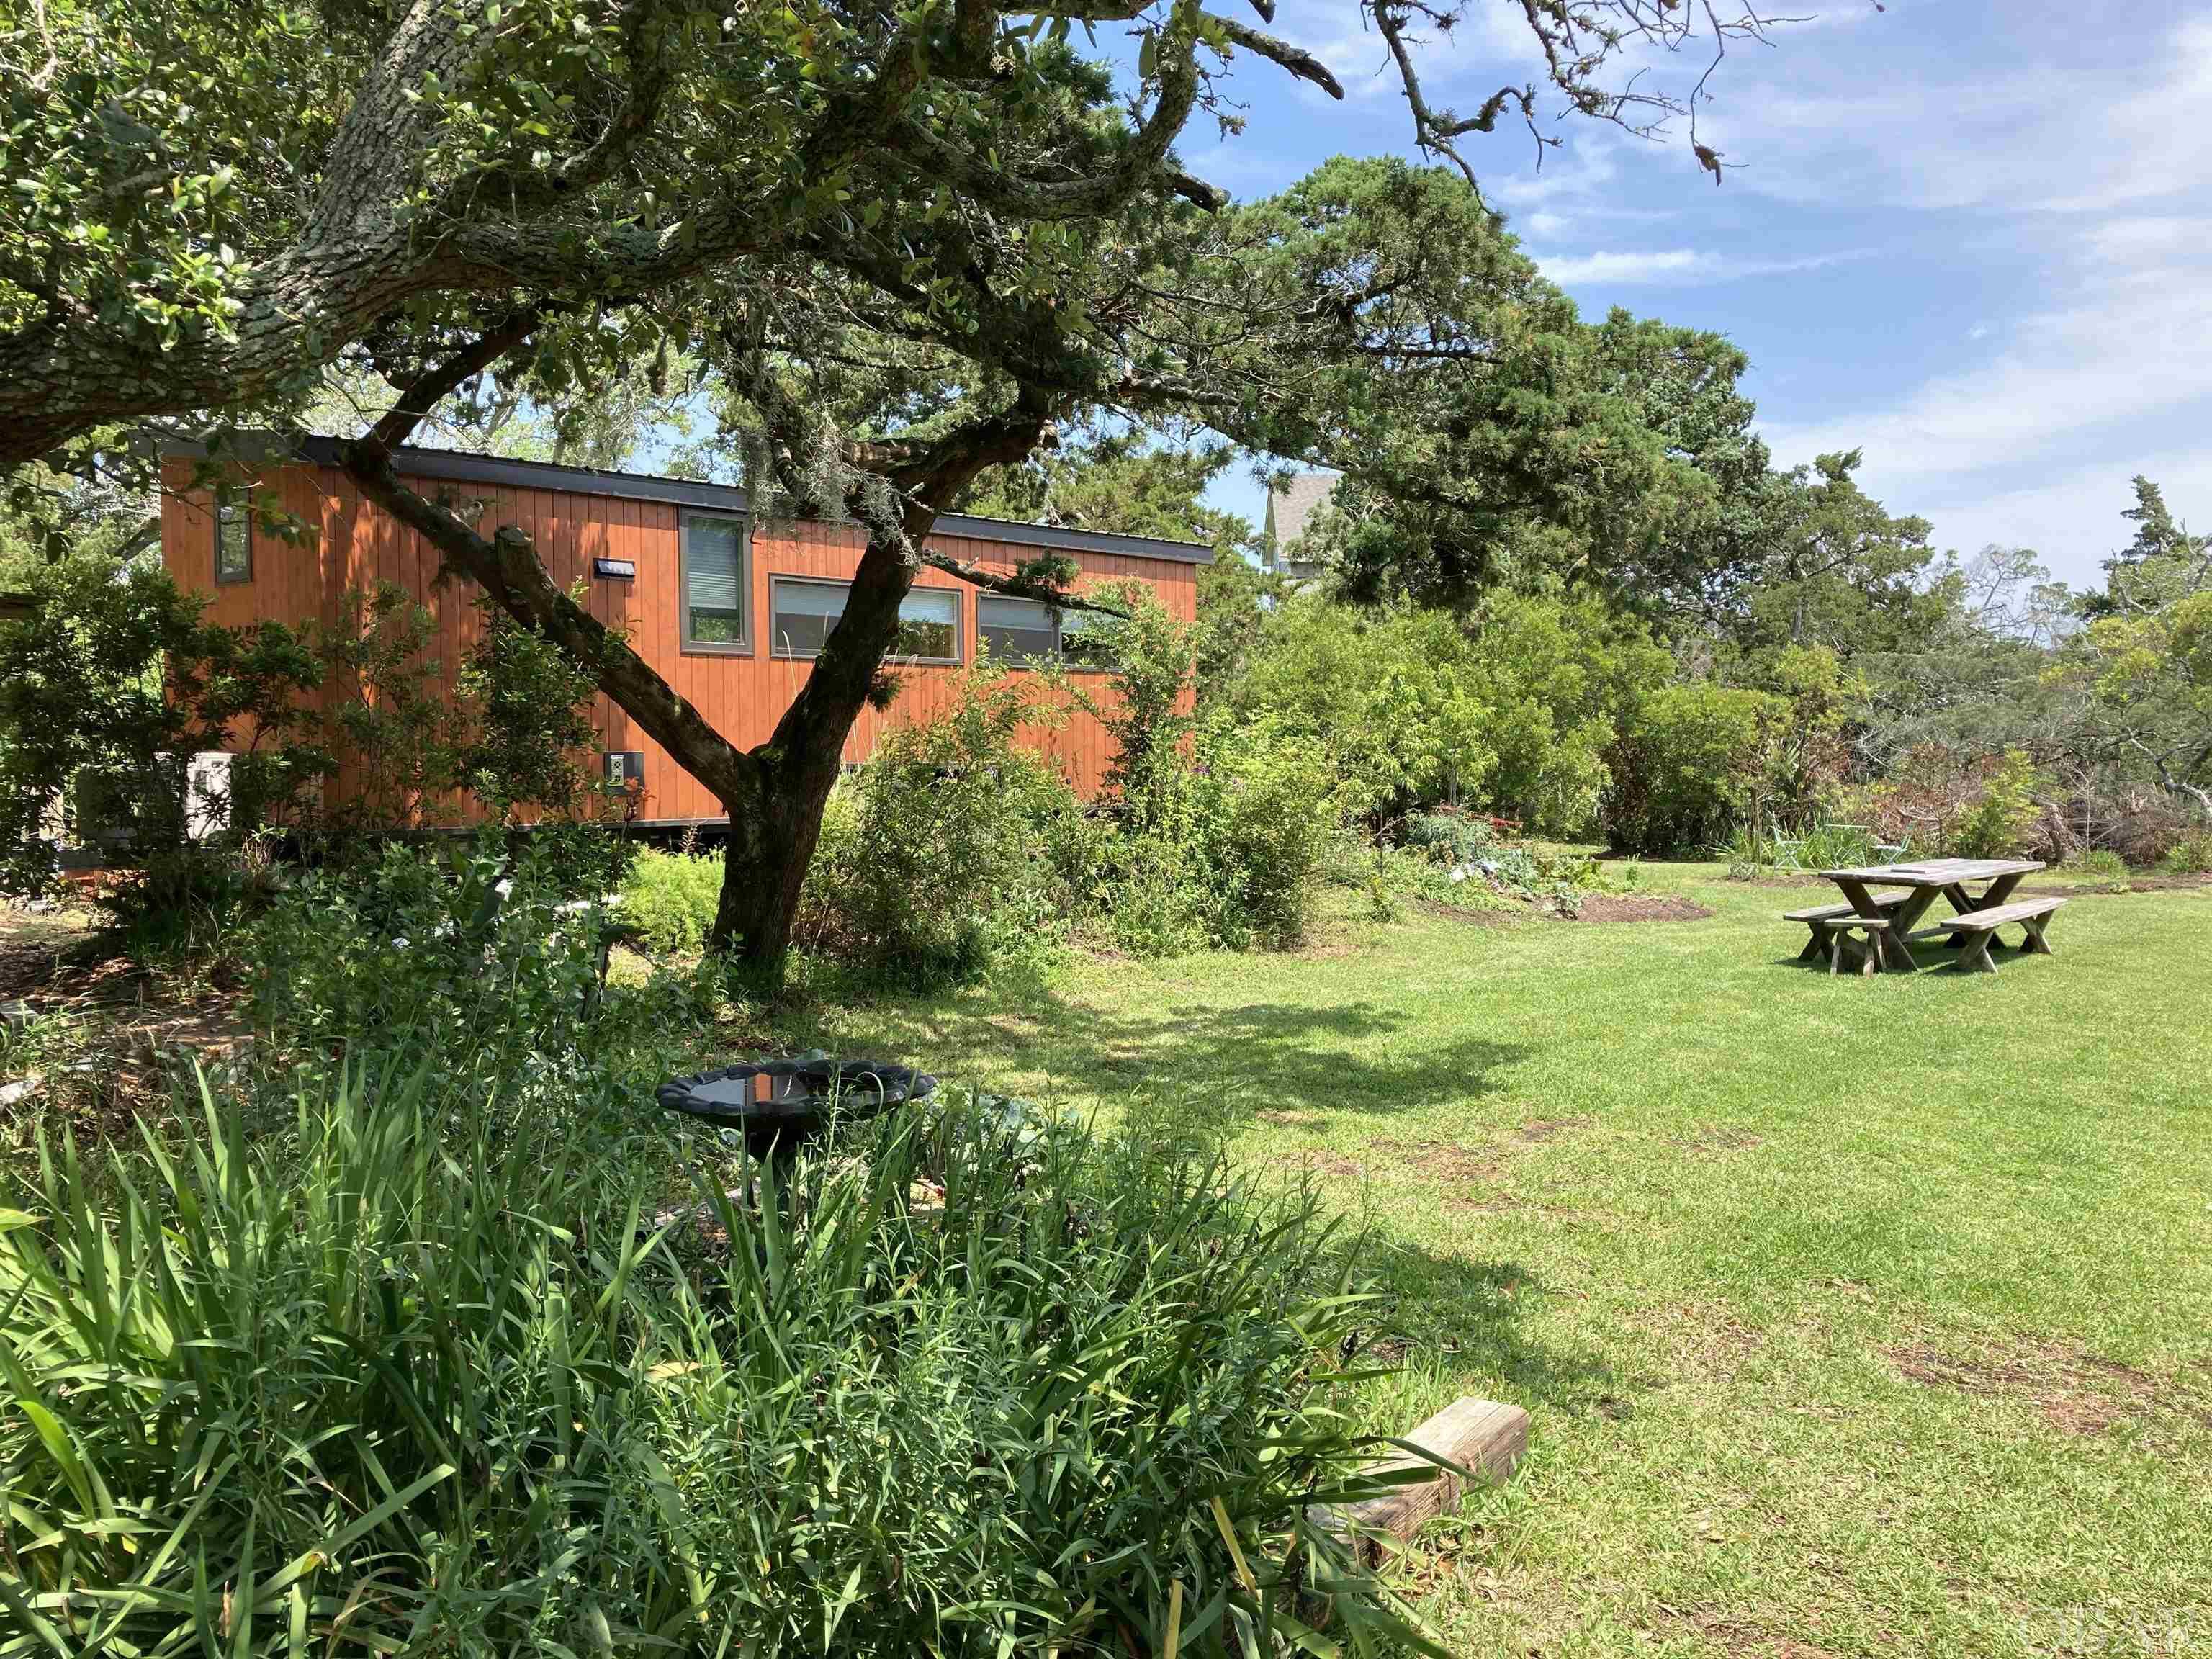 This property offers an incredible opportunity in a buildable lot with an existing tiny home. Boasting over 7,400 sq ft, find yourself tucked away in the enchanting gardens and sprawling green space. Centrally located within walking distance of Ocracoke's world class dining options. A 3 bedroom septic system on site. Approved for a 3 bedroom house. Site plan and septic permit in supporting documents.   A Boho XL 2020 tiny house by "Escape" conveys with the lot and provides ample rental revenue. Current owners operate as an AirBnb under "Island Tiny House."  Gas range, on demand hot water heater, Fujitsu mini-split, pine interior, and sliding barn door.   https://www.airbnb.com/rooms/46769108?source_impression_id=p3_1653760503_RJU5sABnYMTG27UG